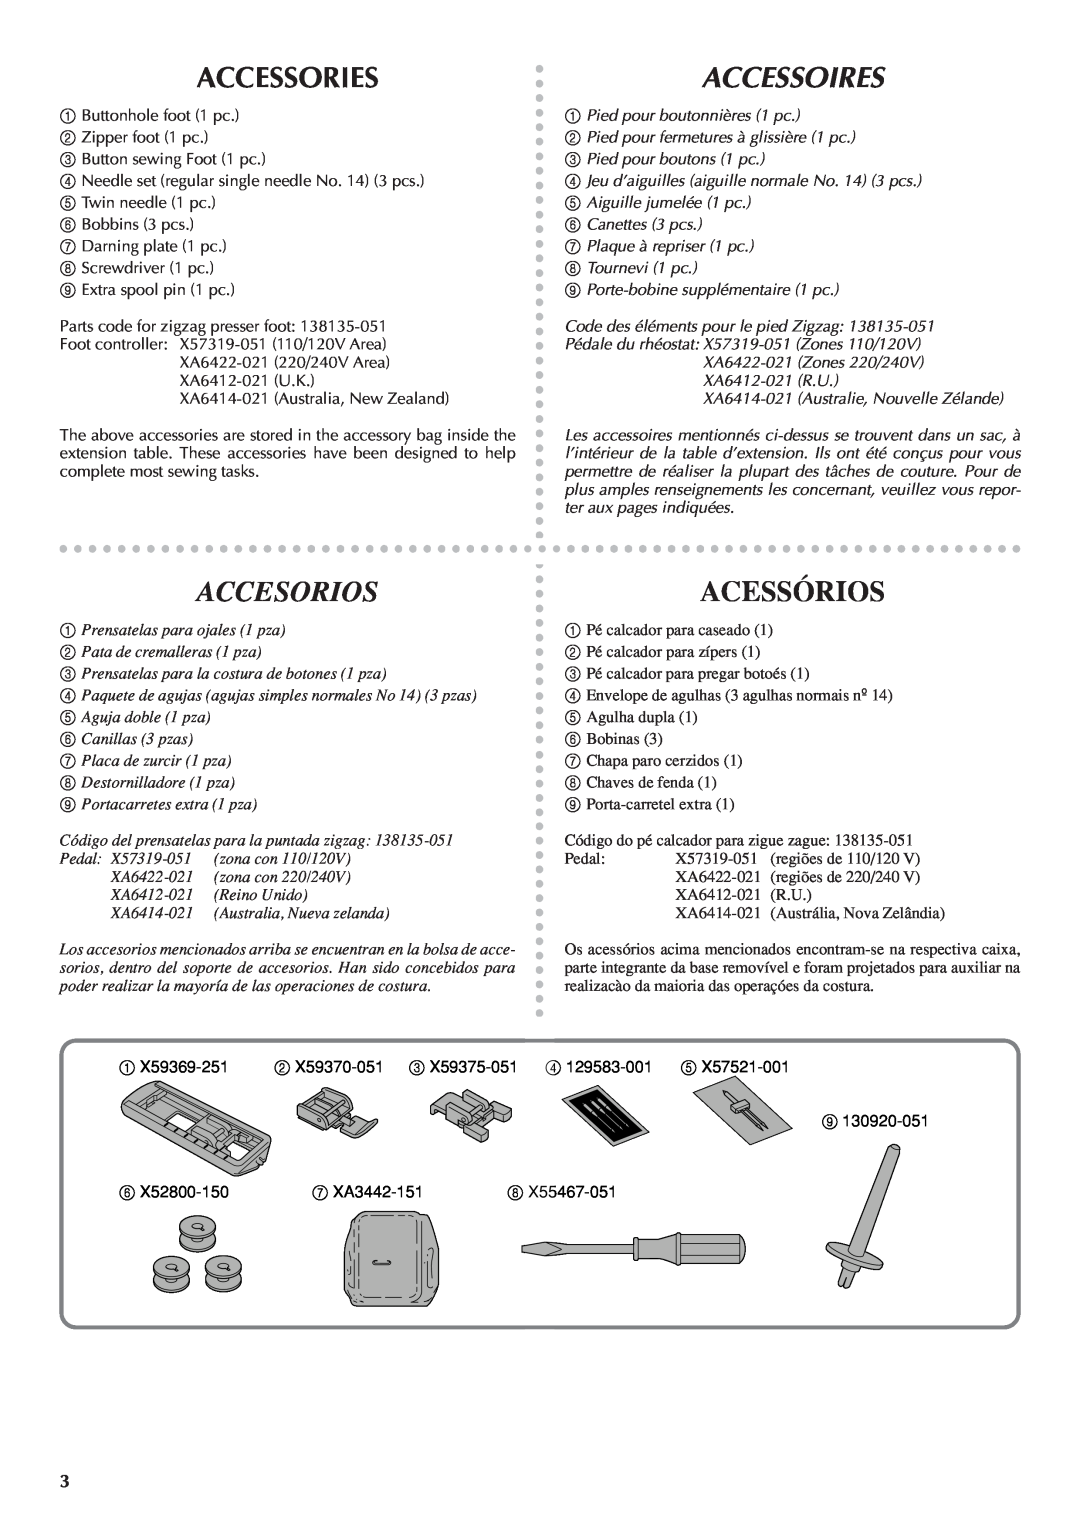 Brother LS 1520 instruction manual Accessories, Accesorios, Acessórios, Accessoires 